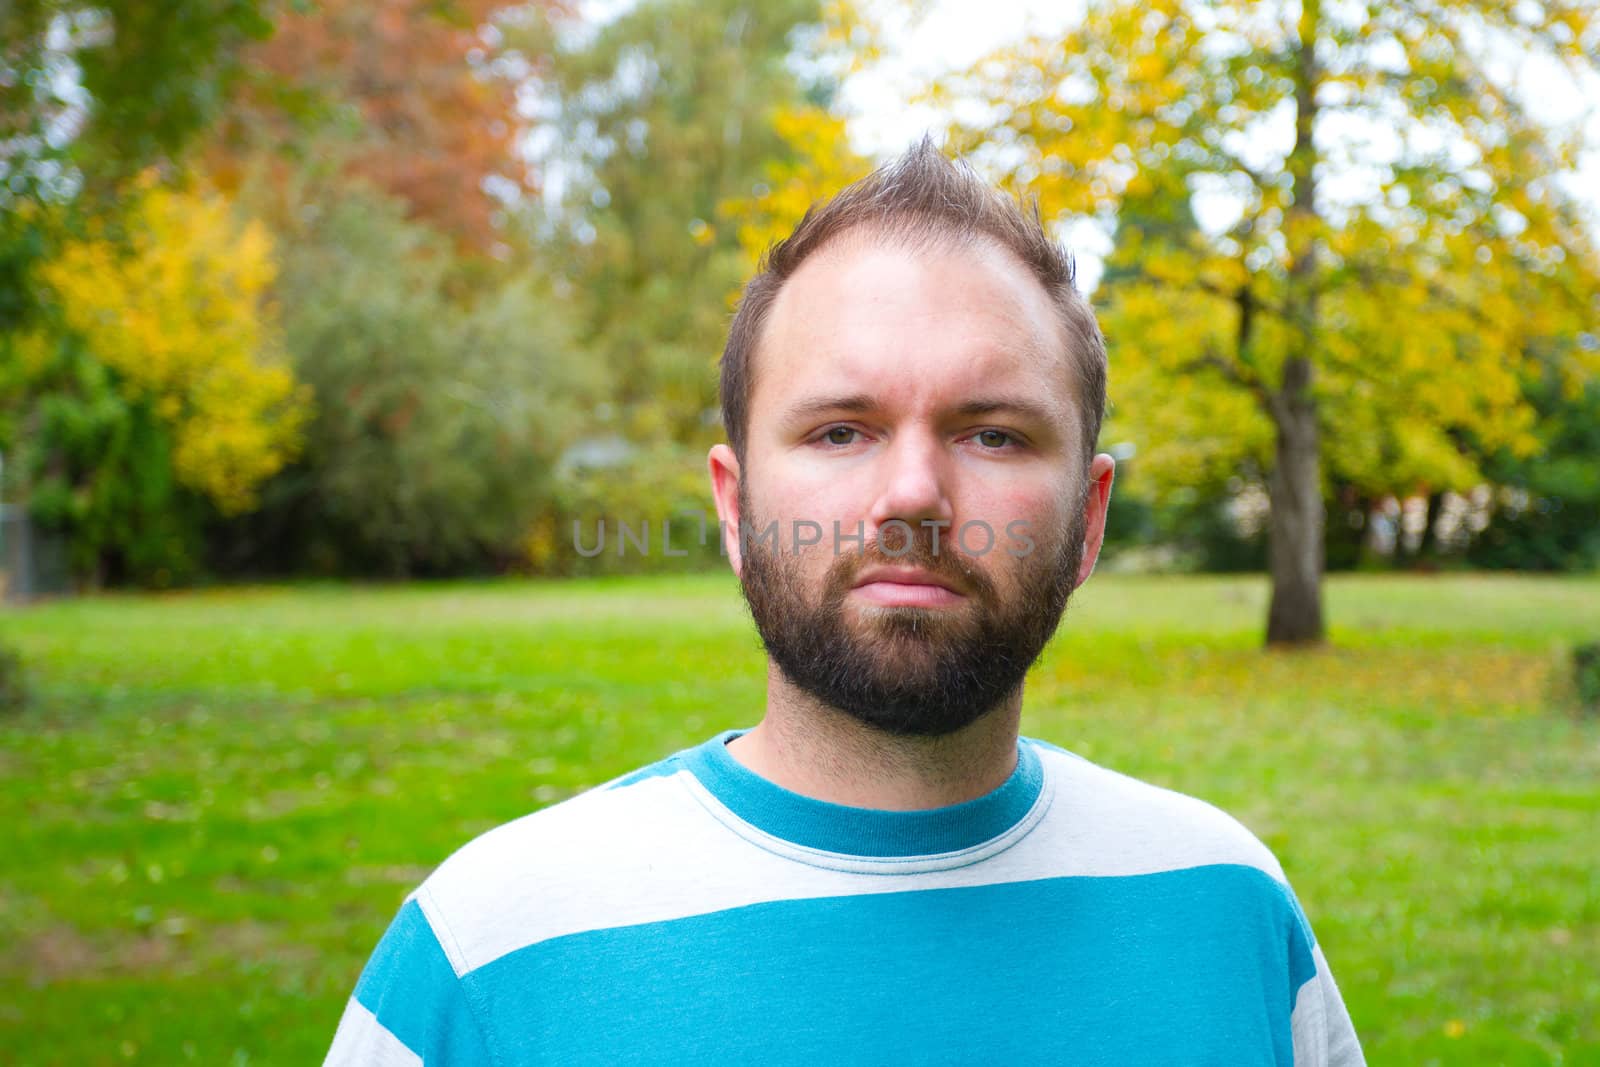 A man with a full beard looks directly at the camera while outdoors in a park setting.